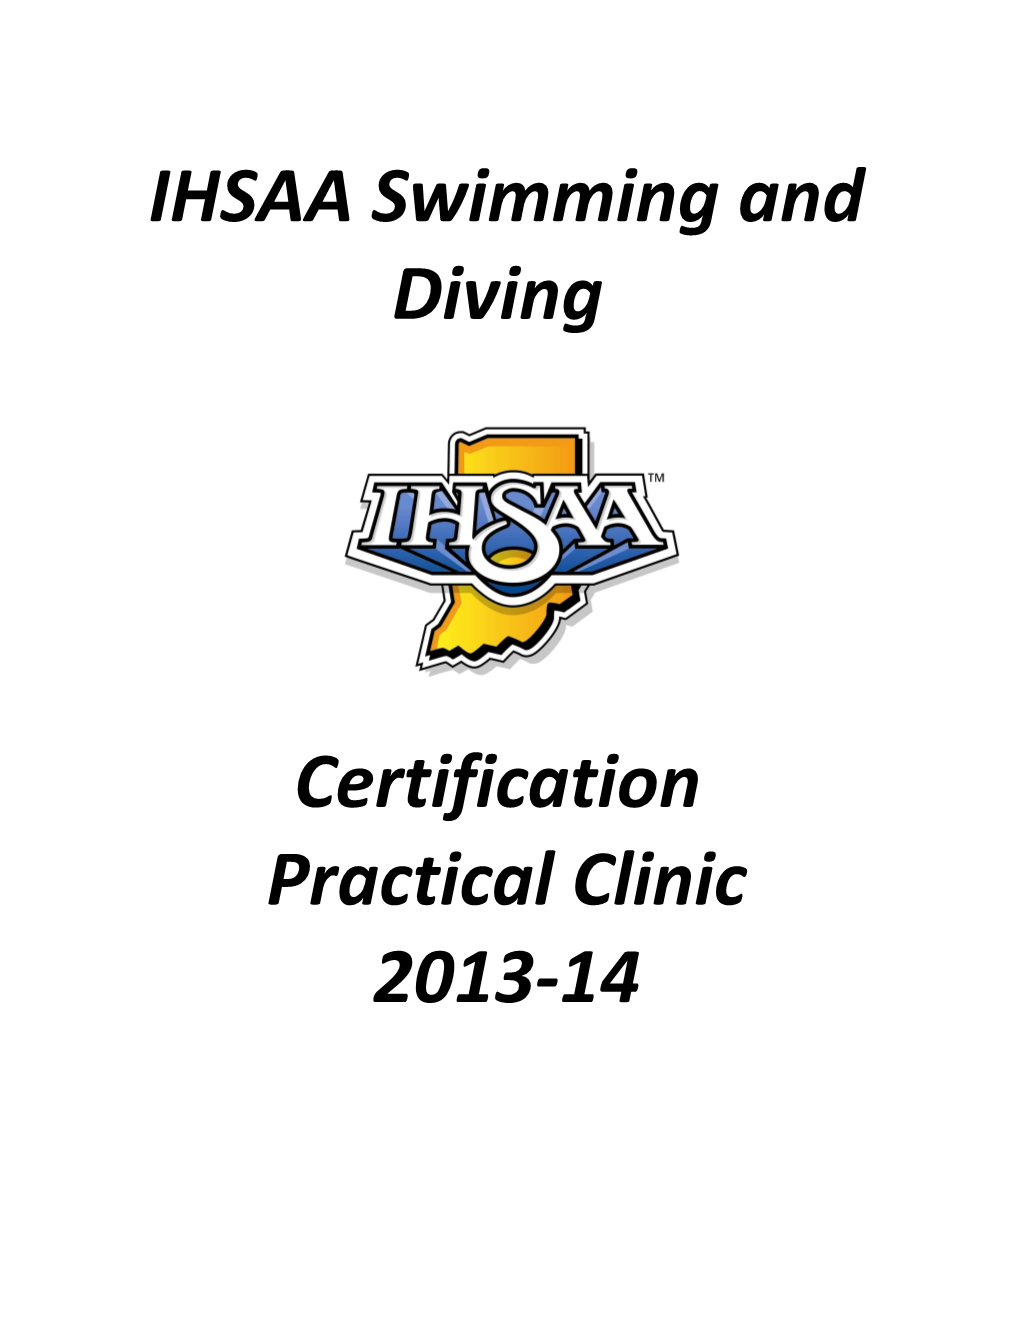 IHSAA Swimming and Diving